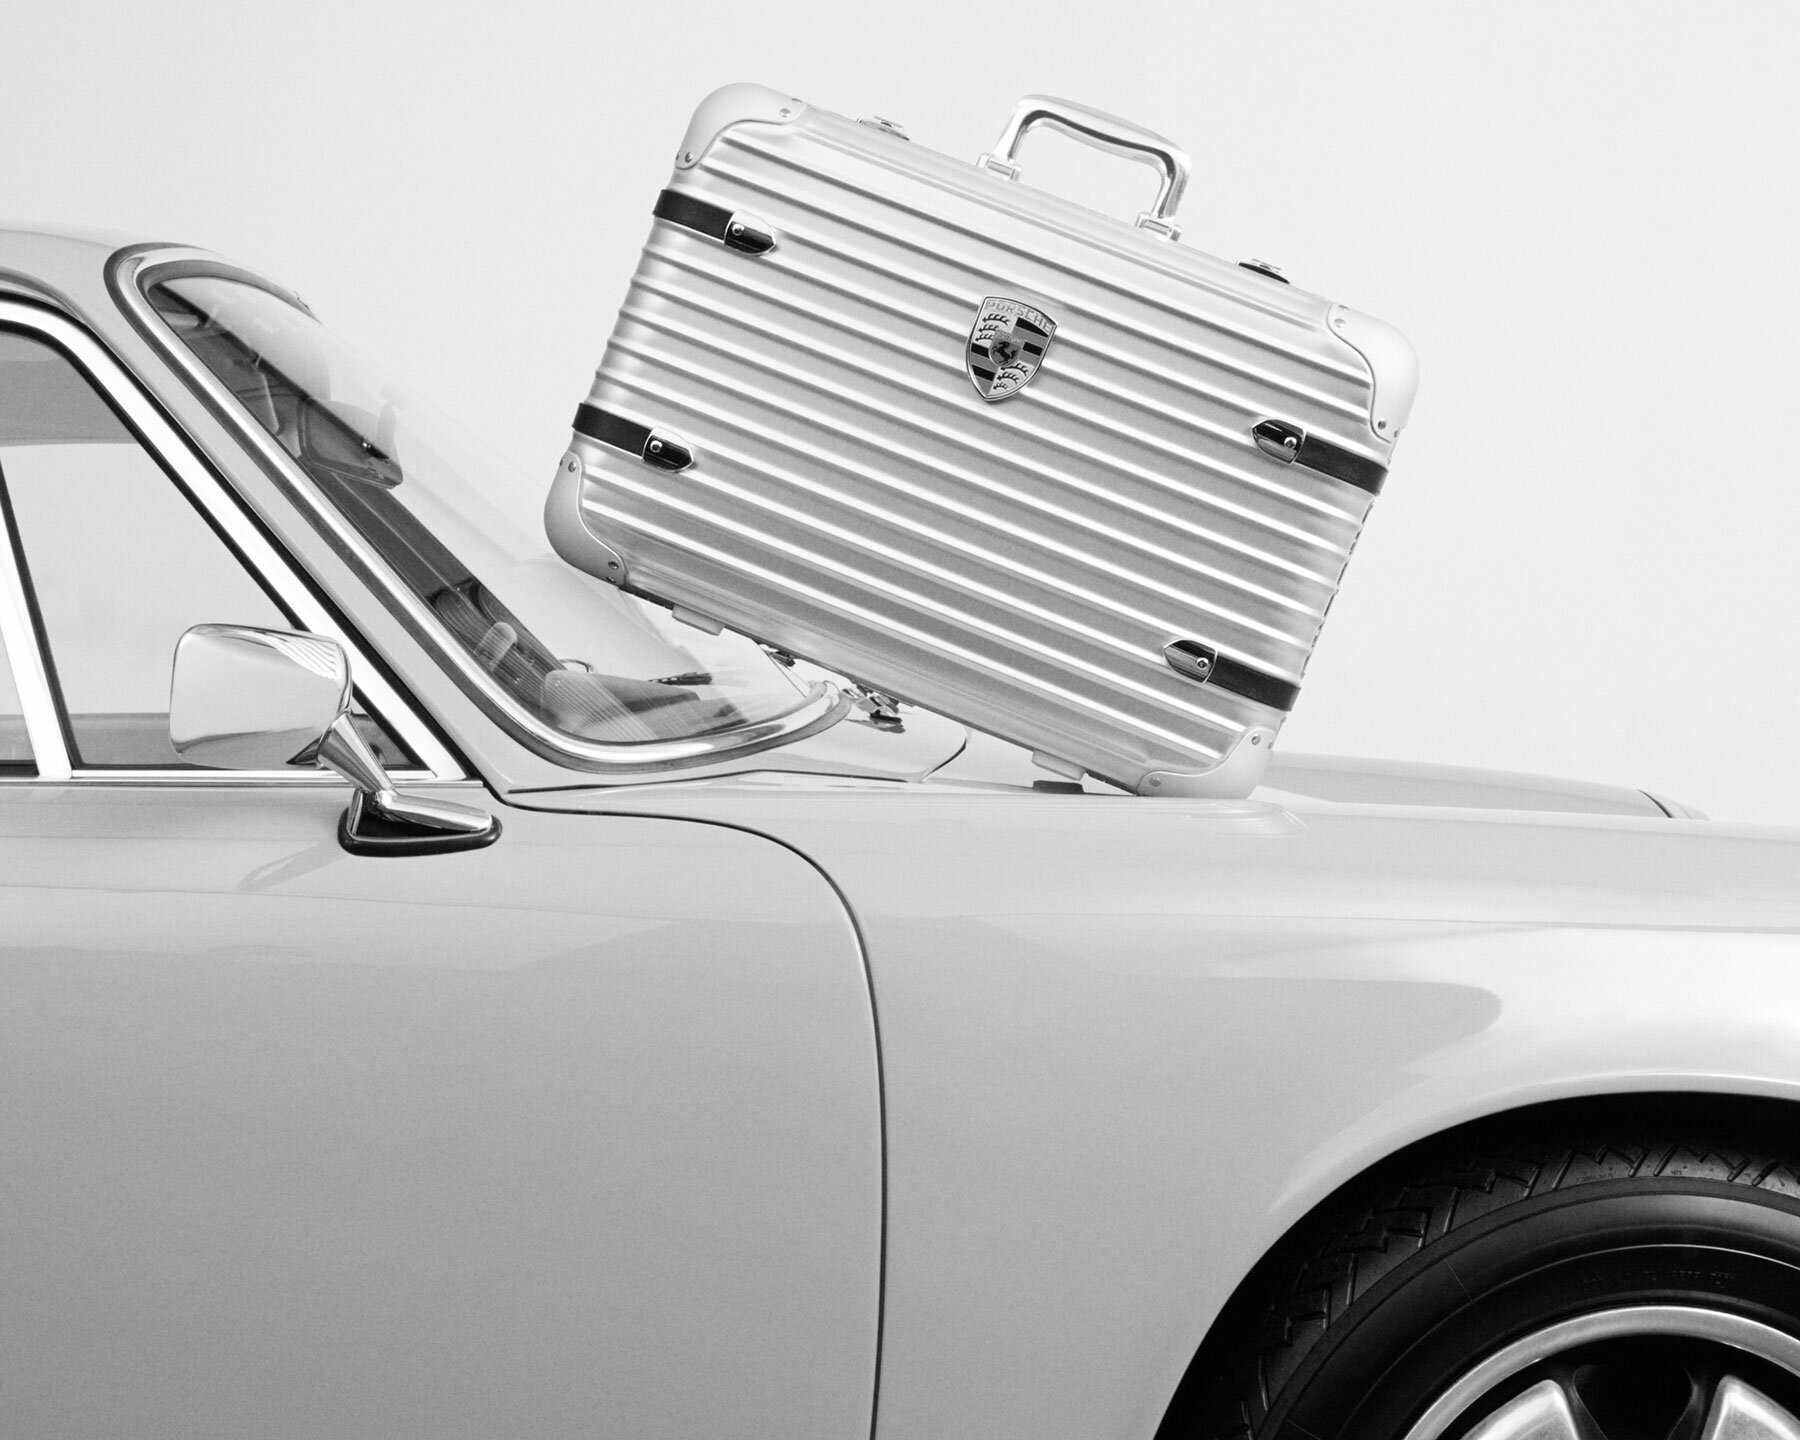 RIMOWA x porsche collaborate to debut limited edition hand-carry case